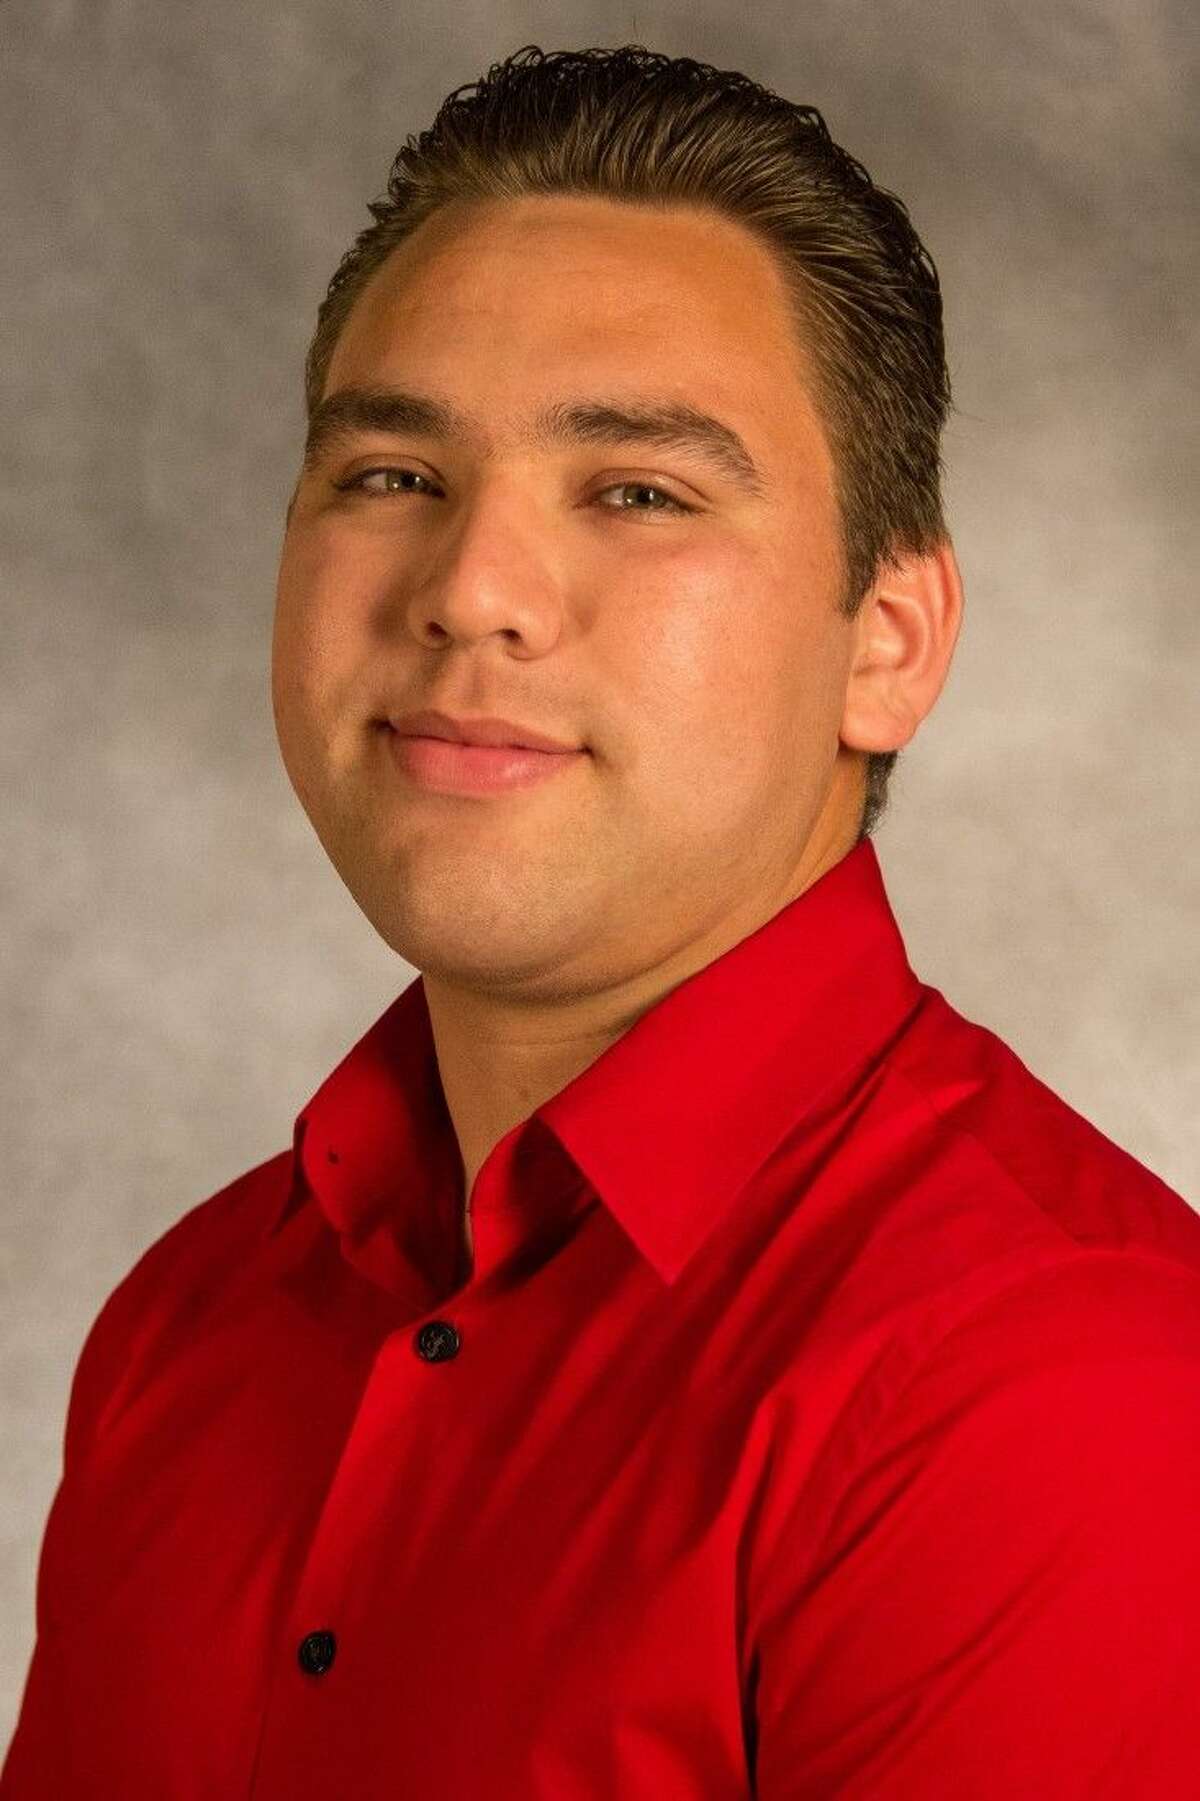 College of the Mainland Student Government Association president Carlos Torres was voted president of the region at the state Student Government Association conference.